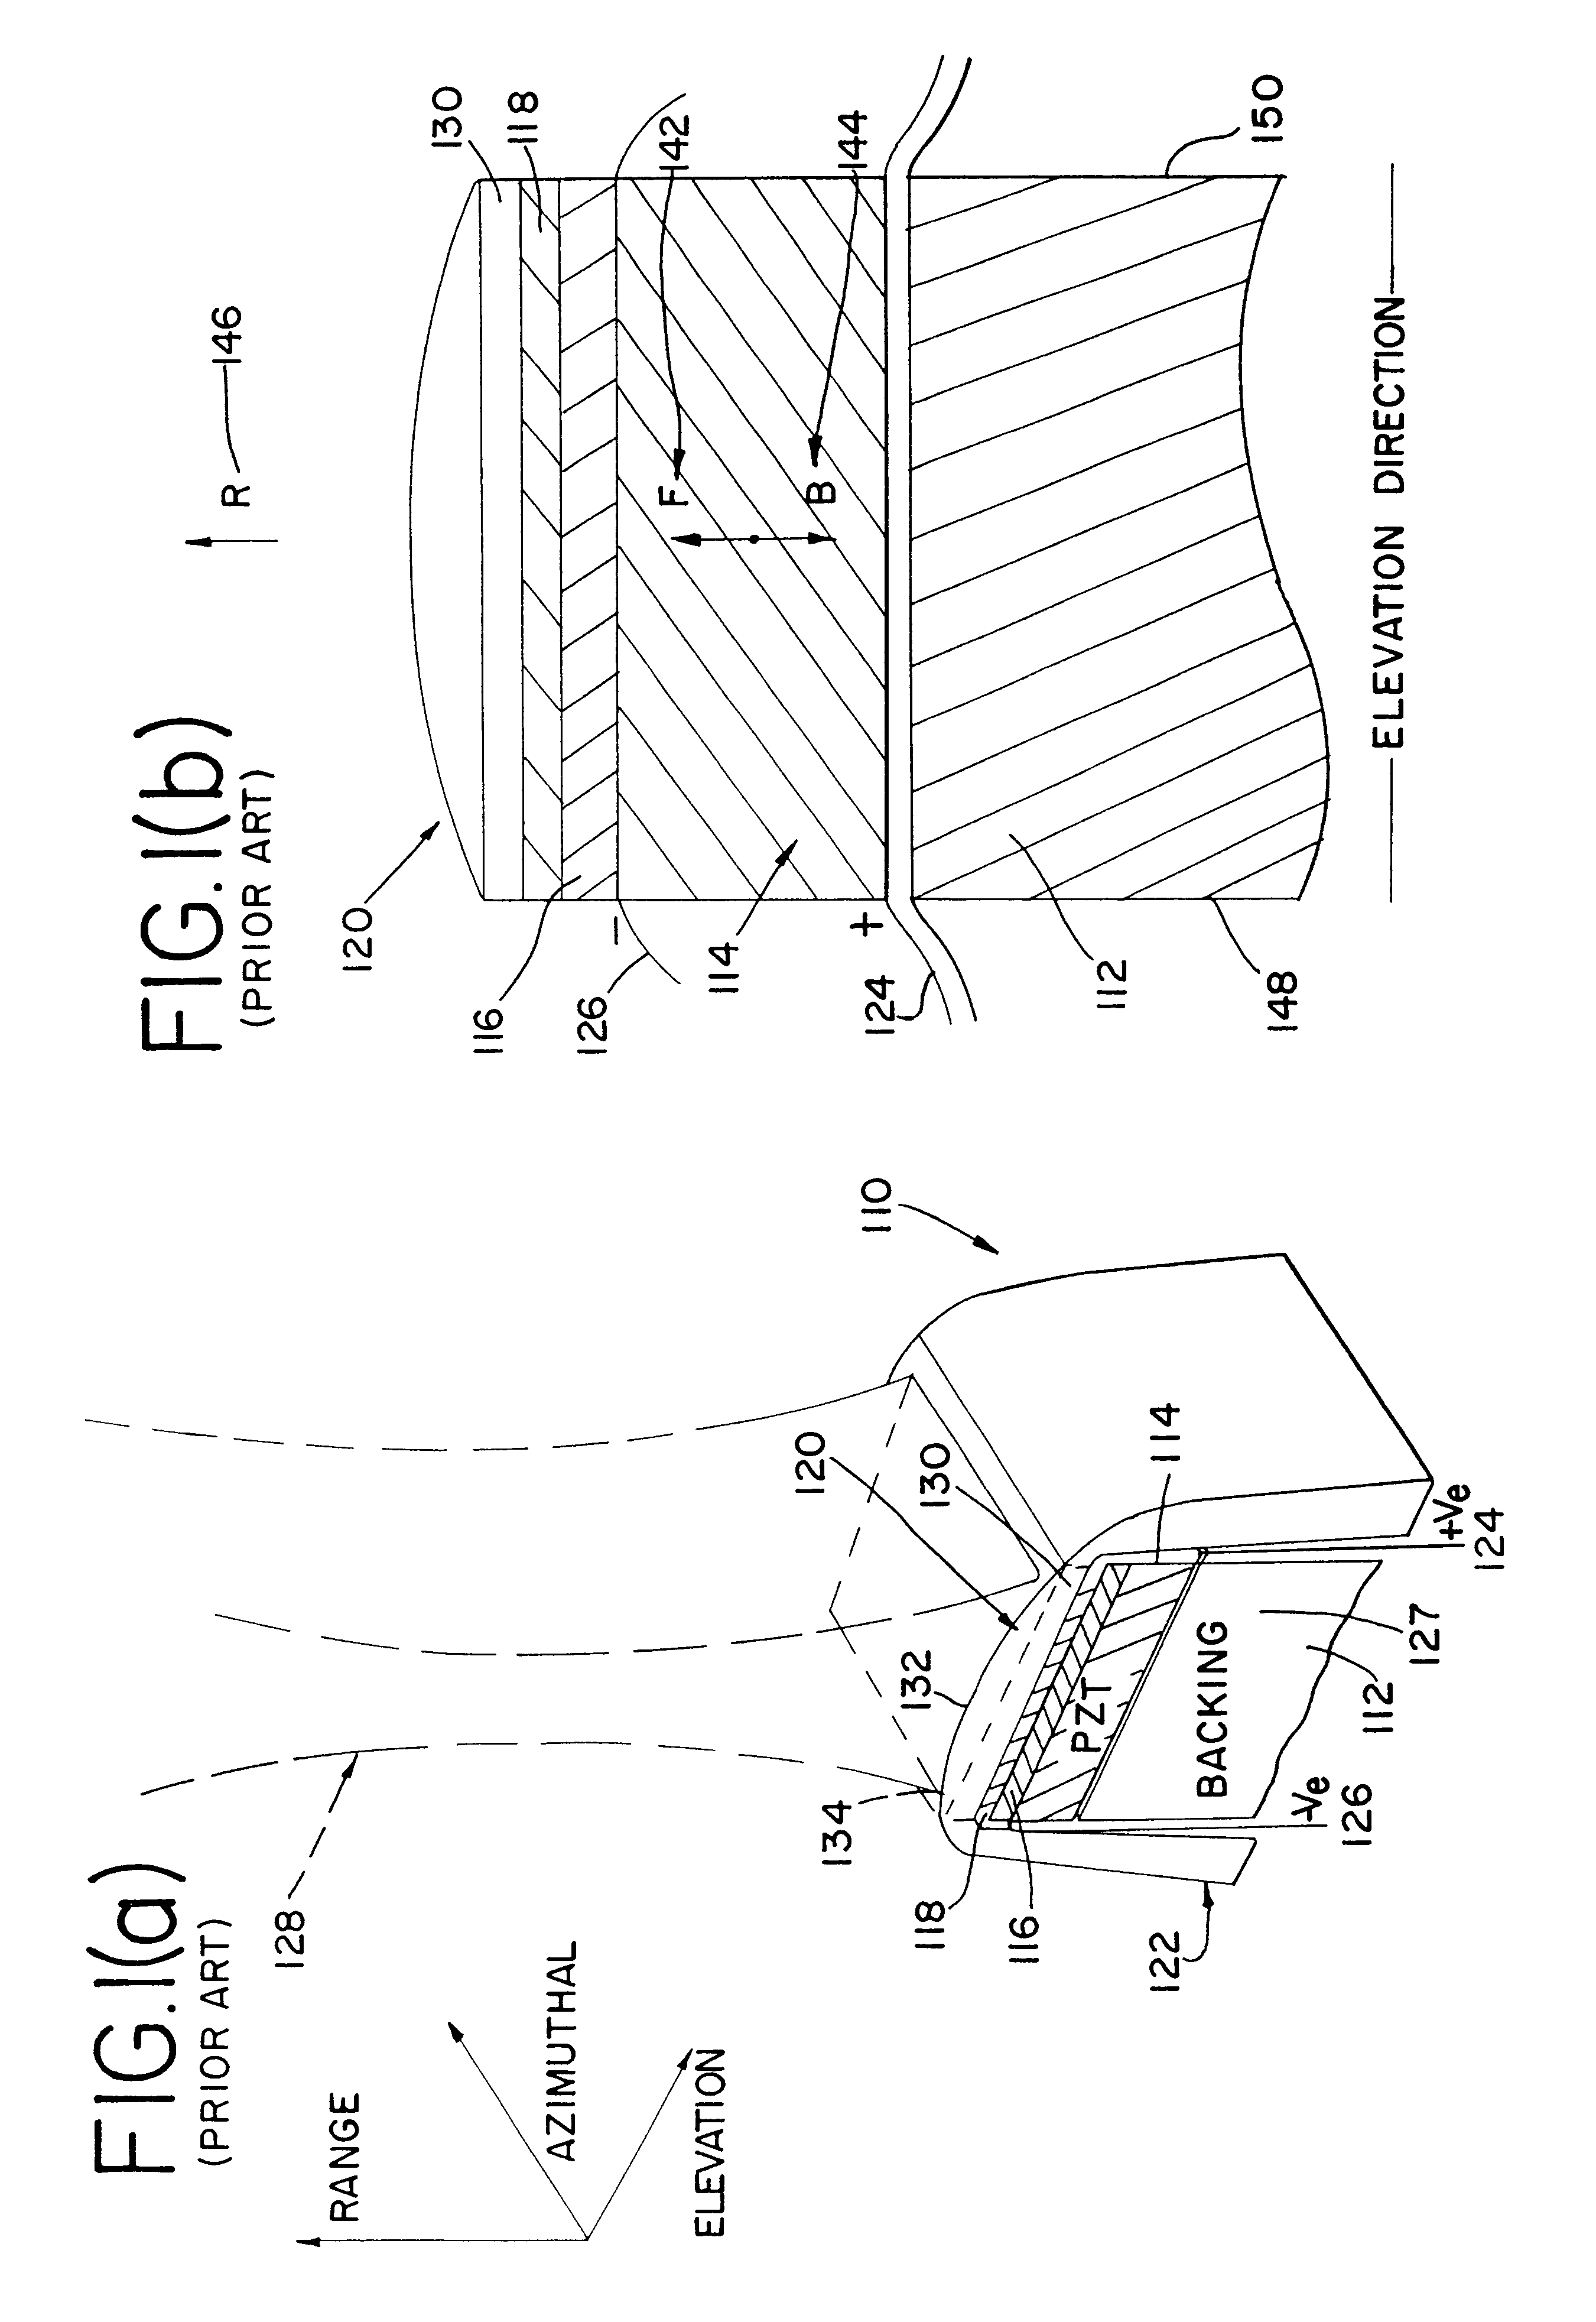 Apodization methods and apparatus for acoustic phased array aperture for diagnostic medical ultrasound transducer